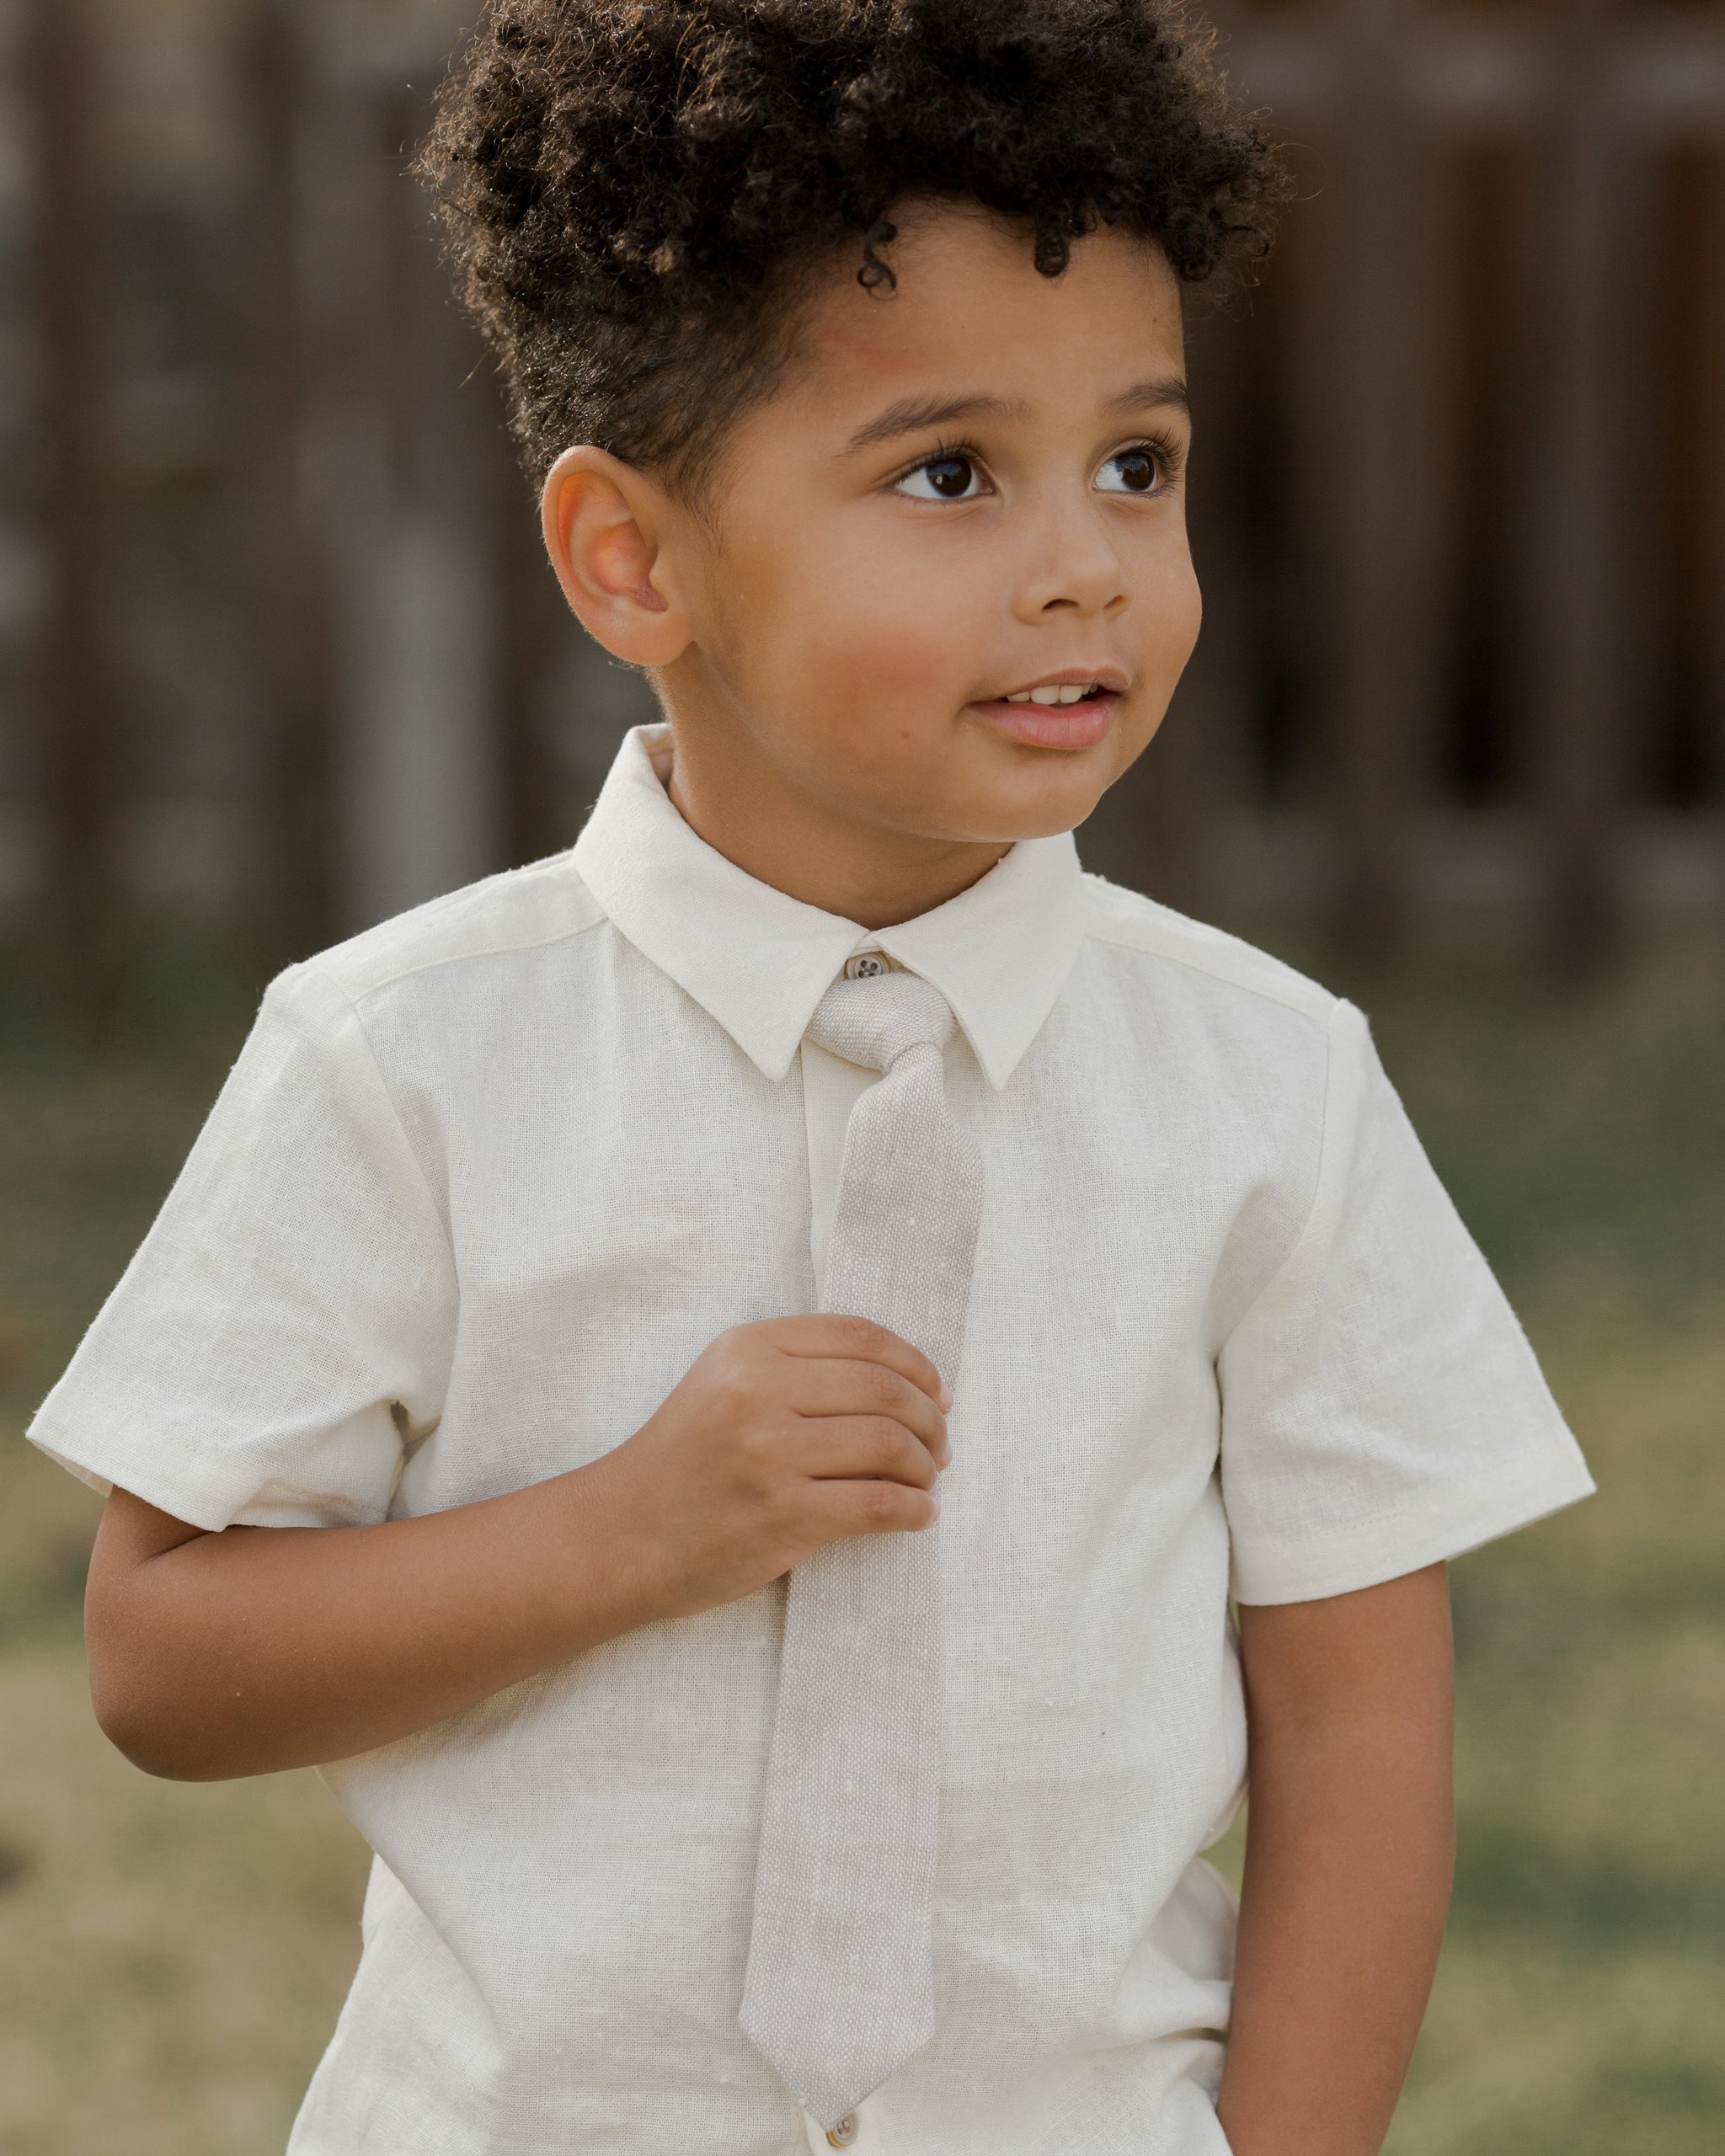 Skinny Tie || Linen - Rylee + Cru | Kids Clothes | Trendy Baby Clothes | Modern Infant Outfits |